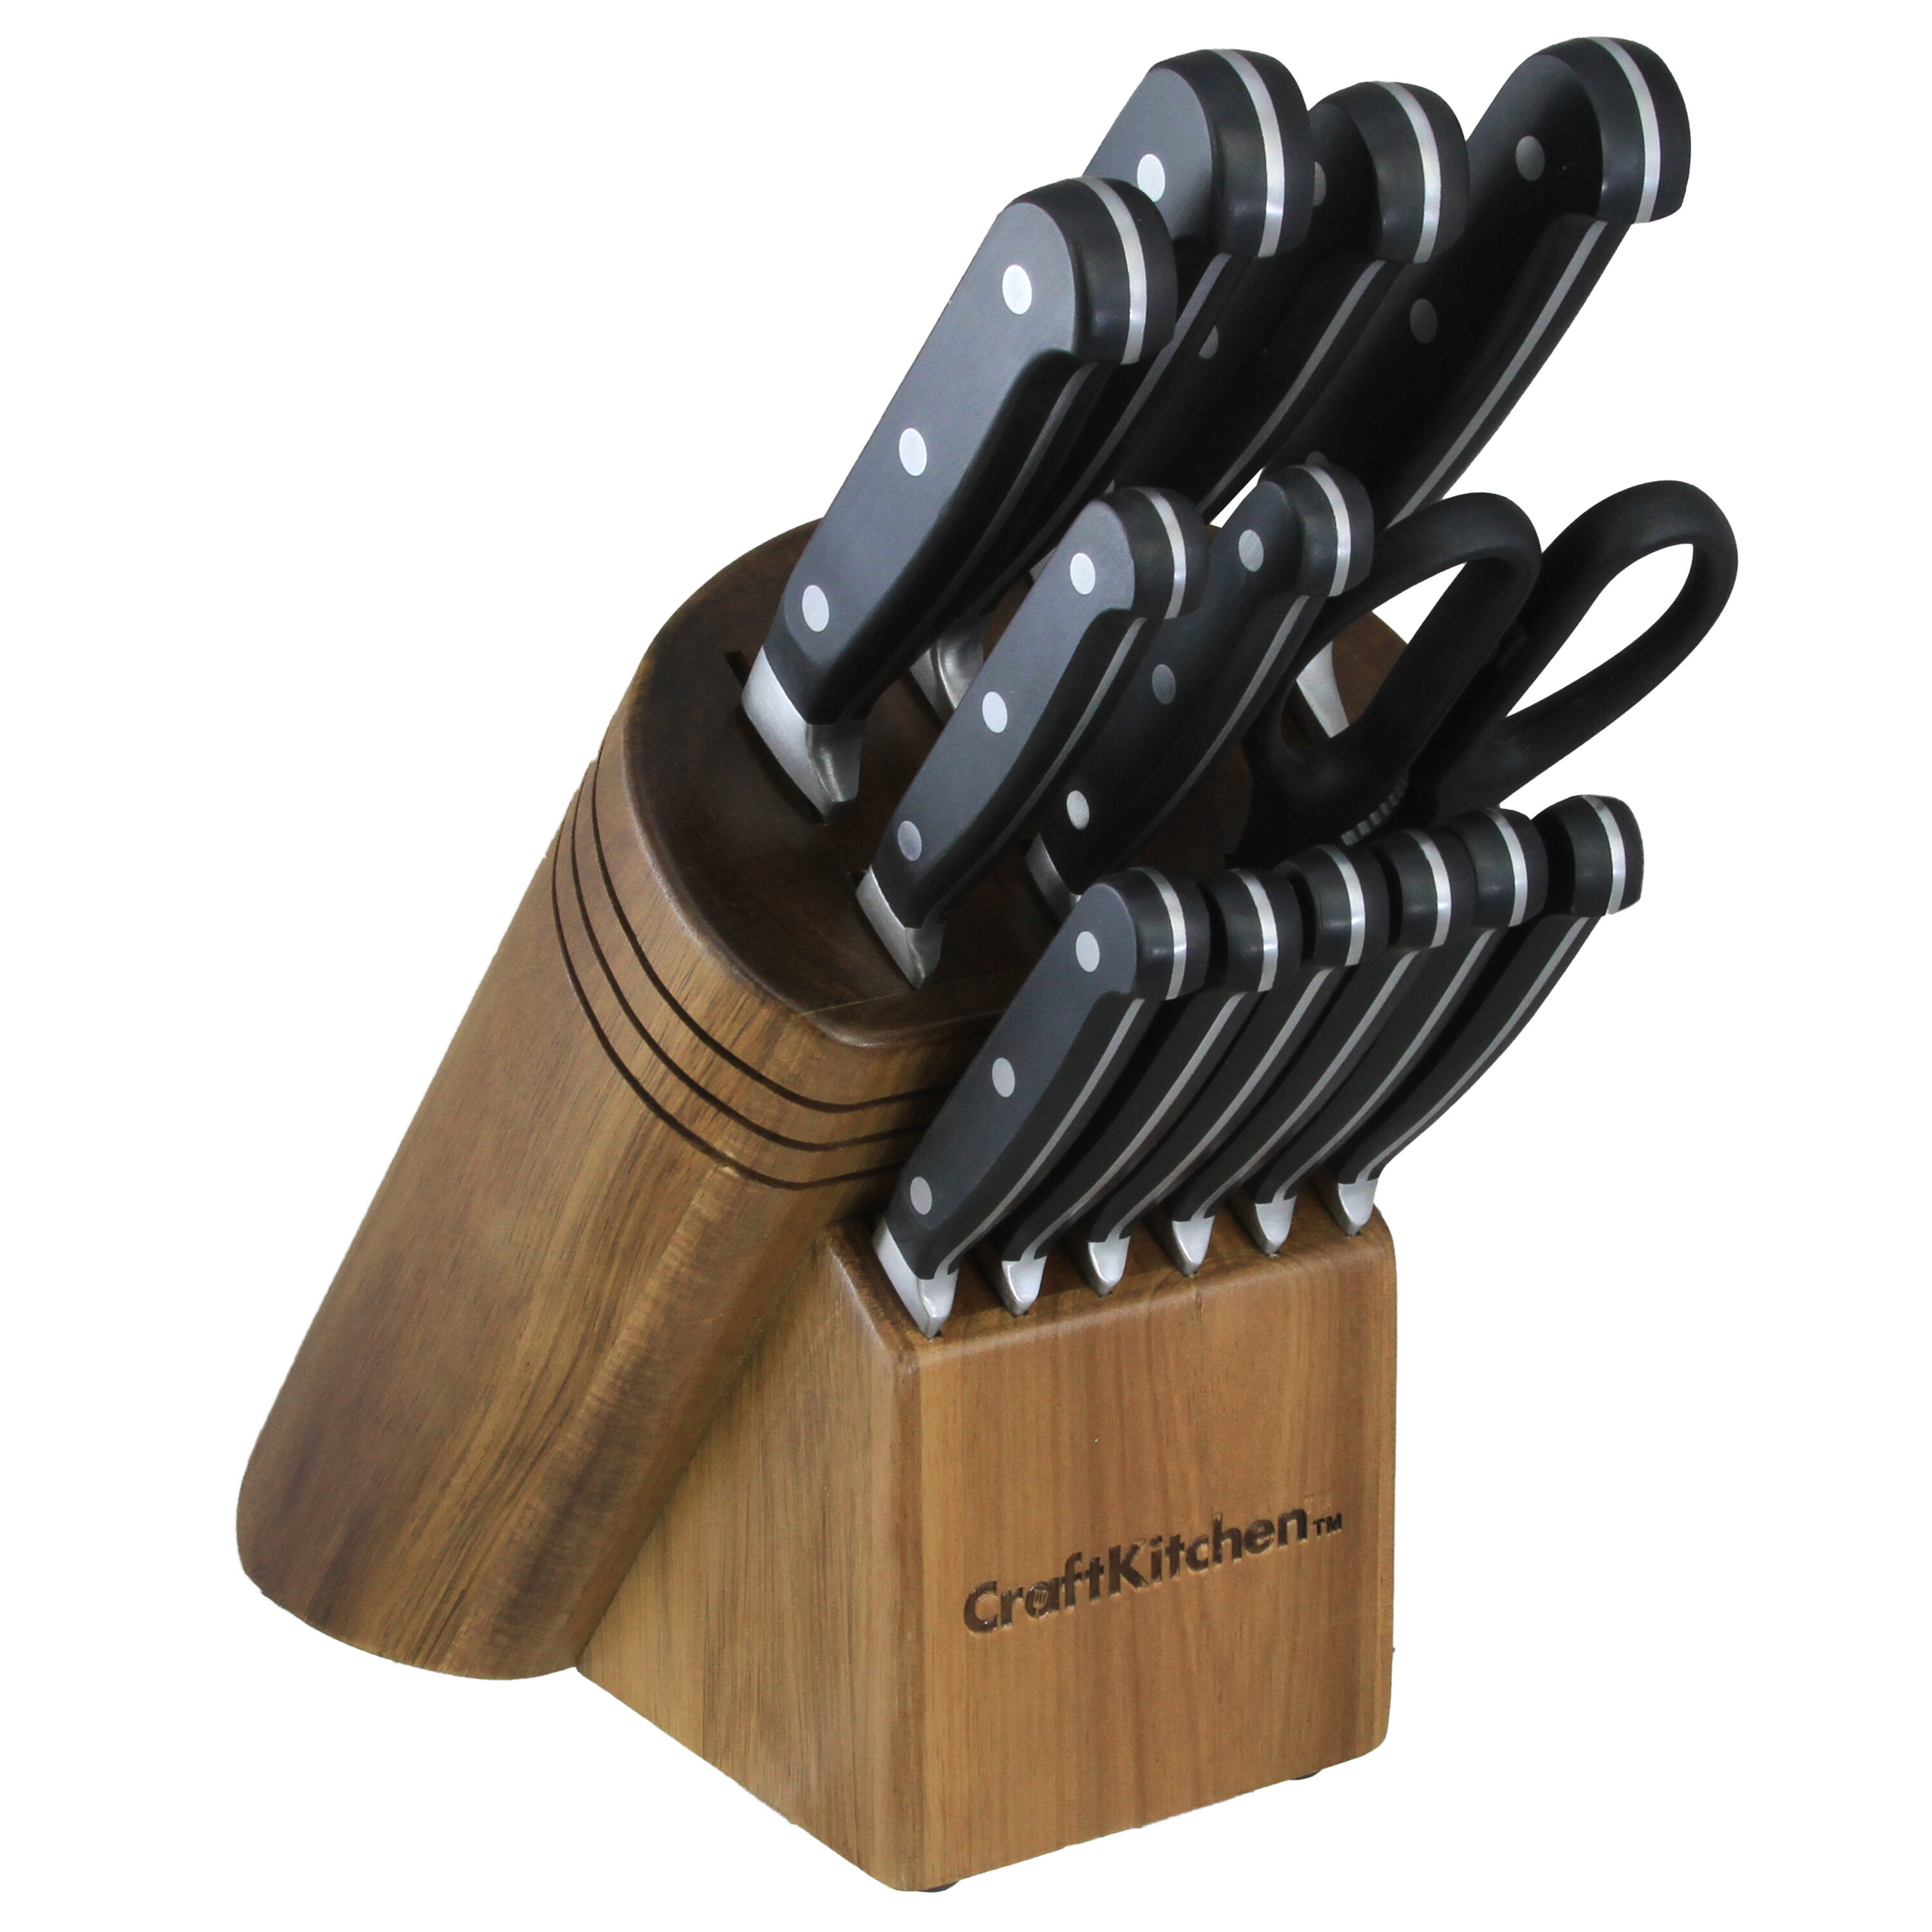   Basics 14-Piece Kitchen Knife Set with High-Carbon  Stainless-Steel Blades and Pine Wood Block, Black: Home & Kitchen